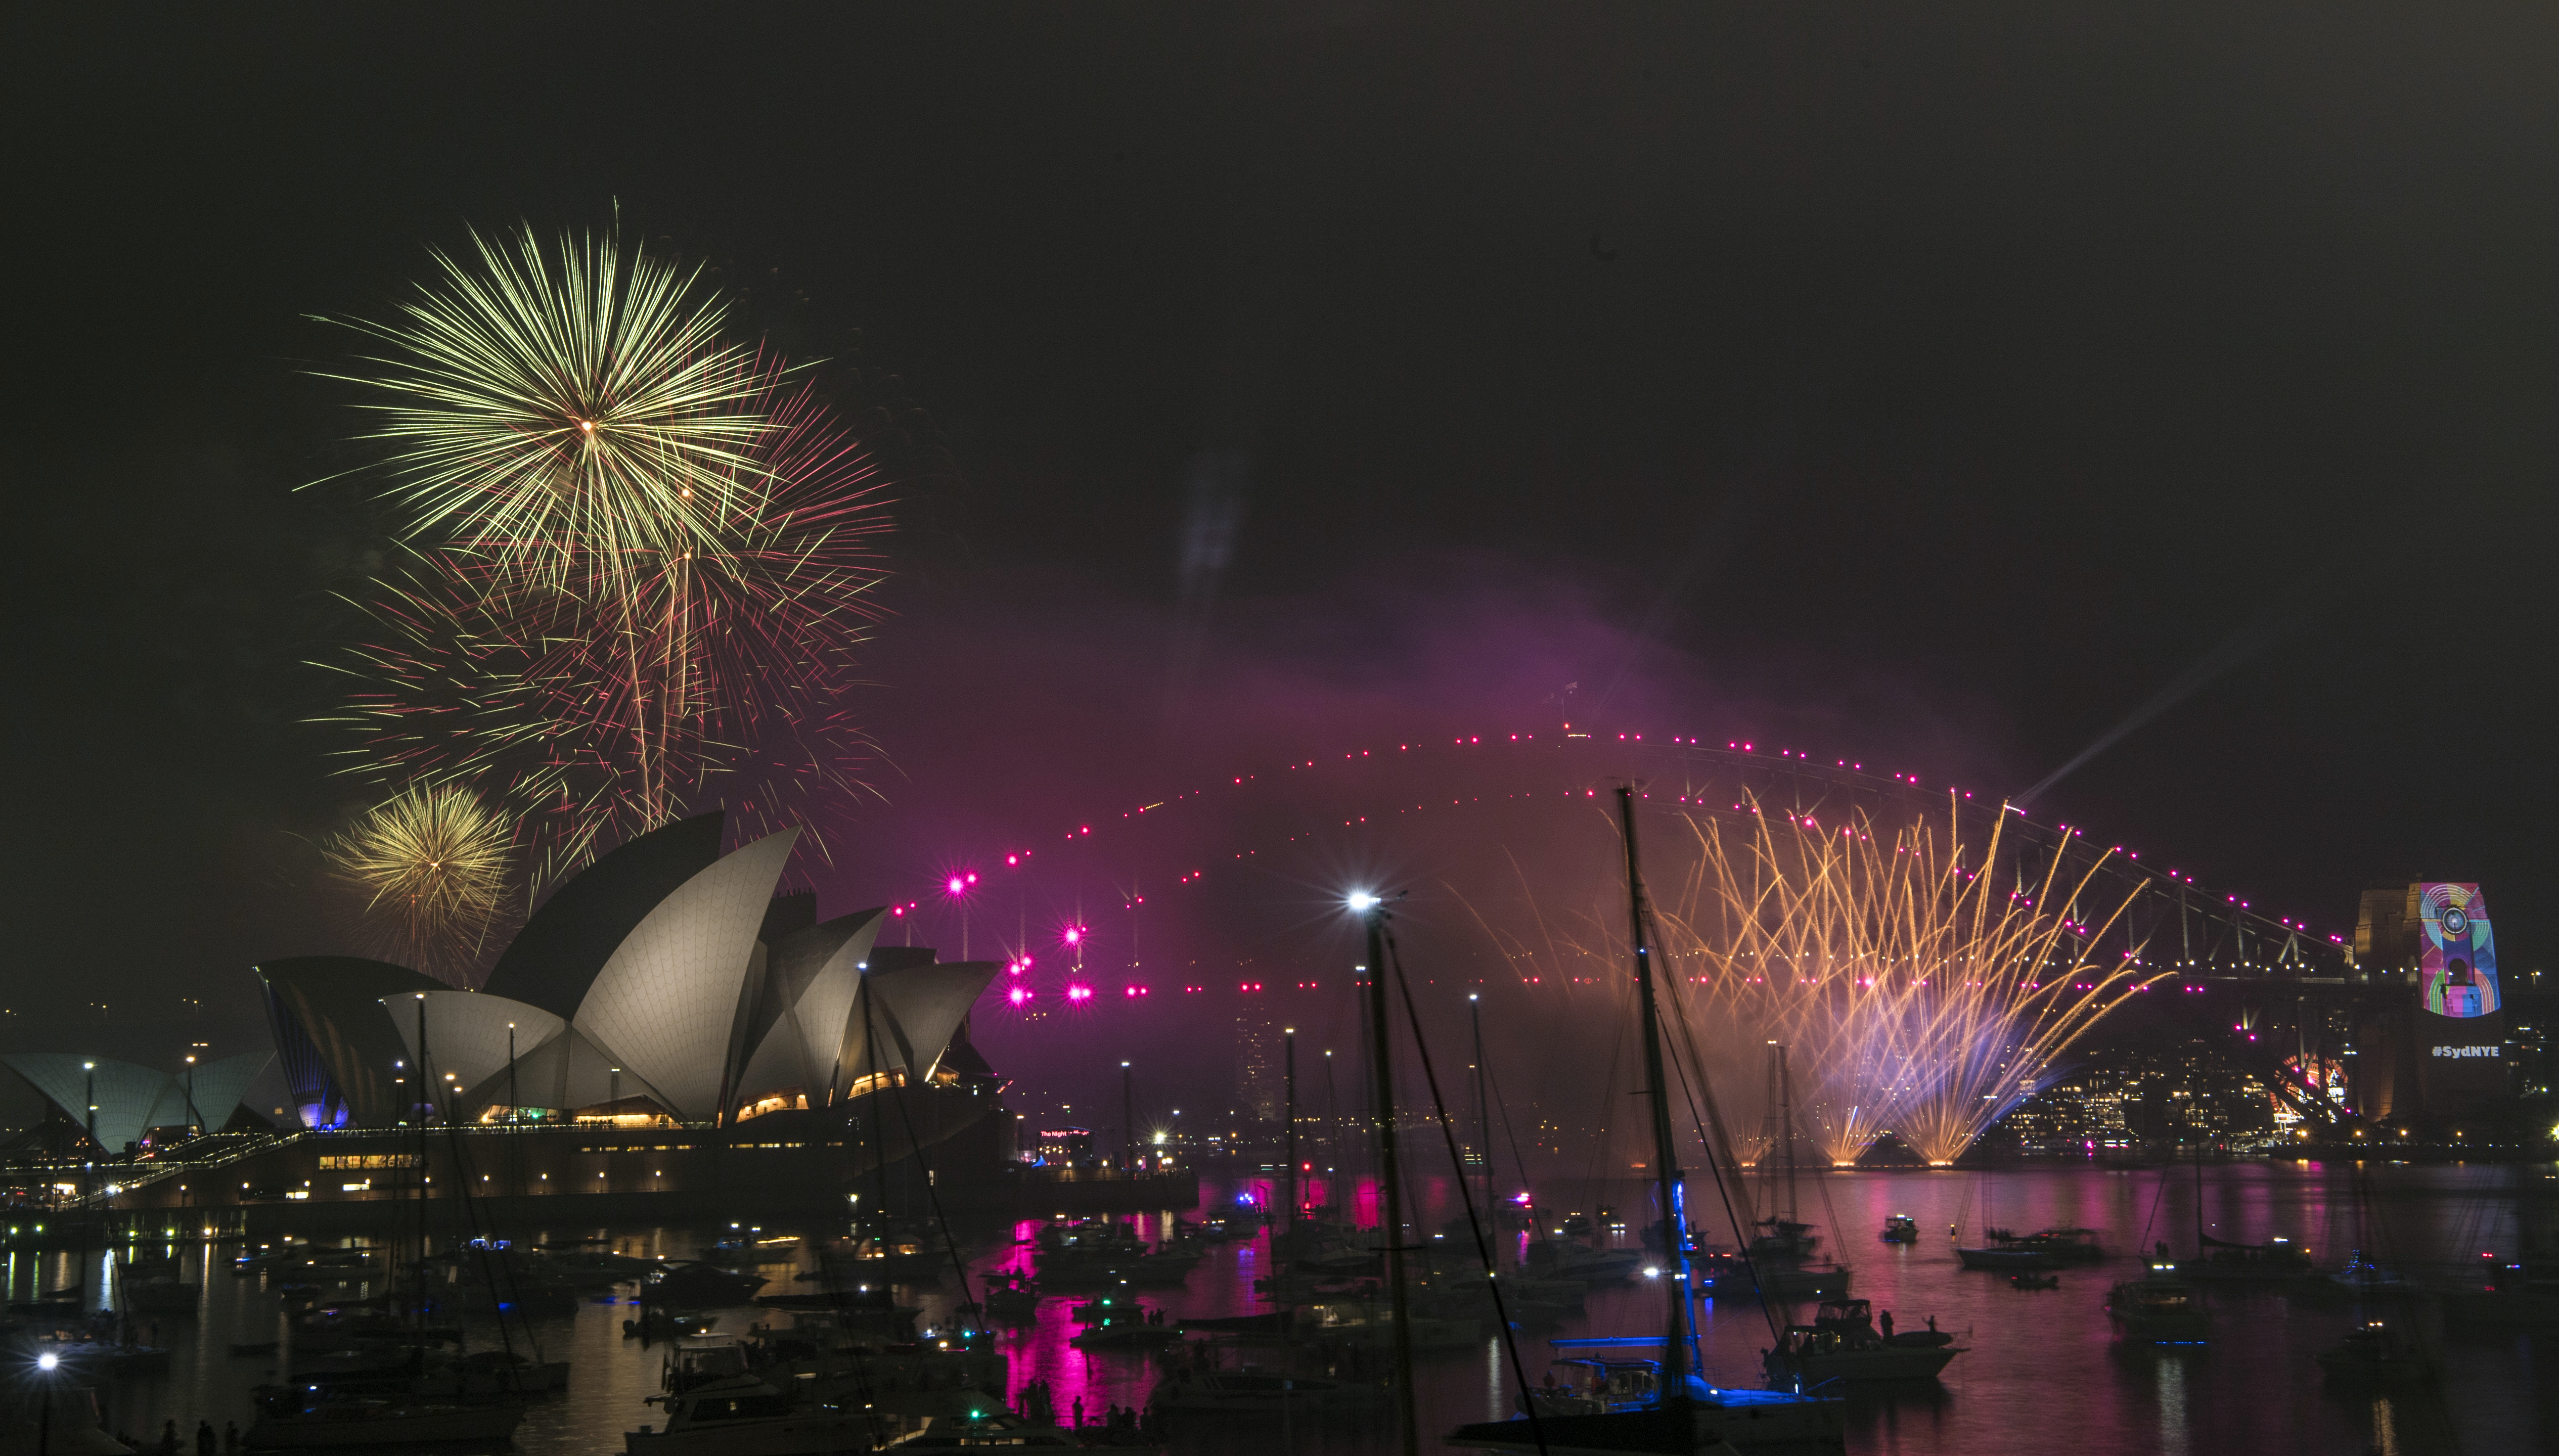 Fireworks explode over the Sydney Harbour during New Year's Eve celebrations in Sydney